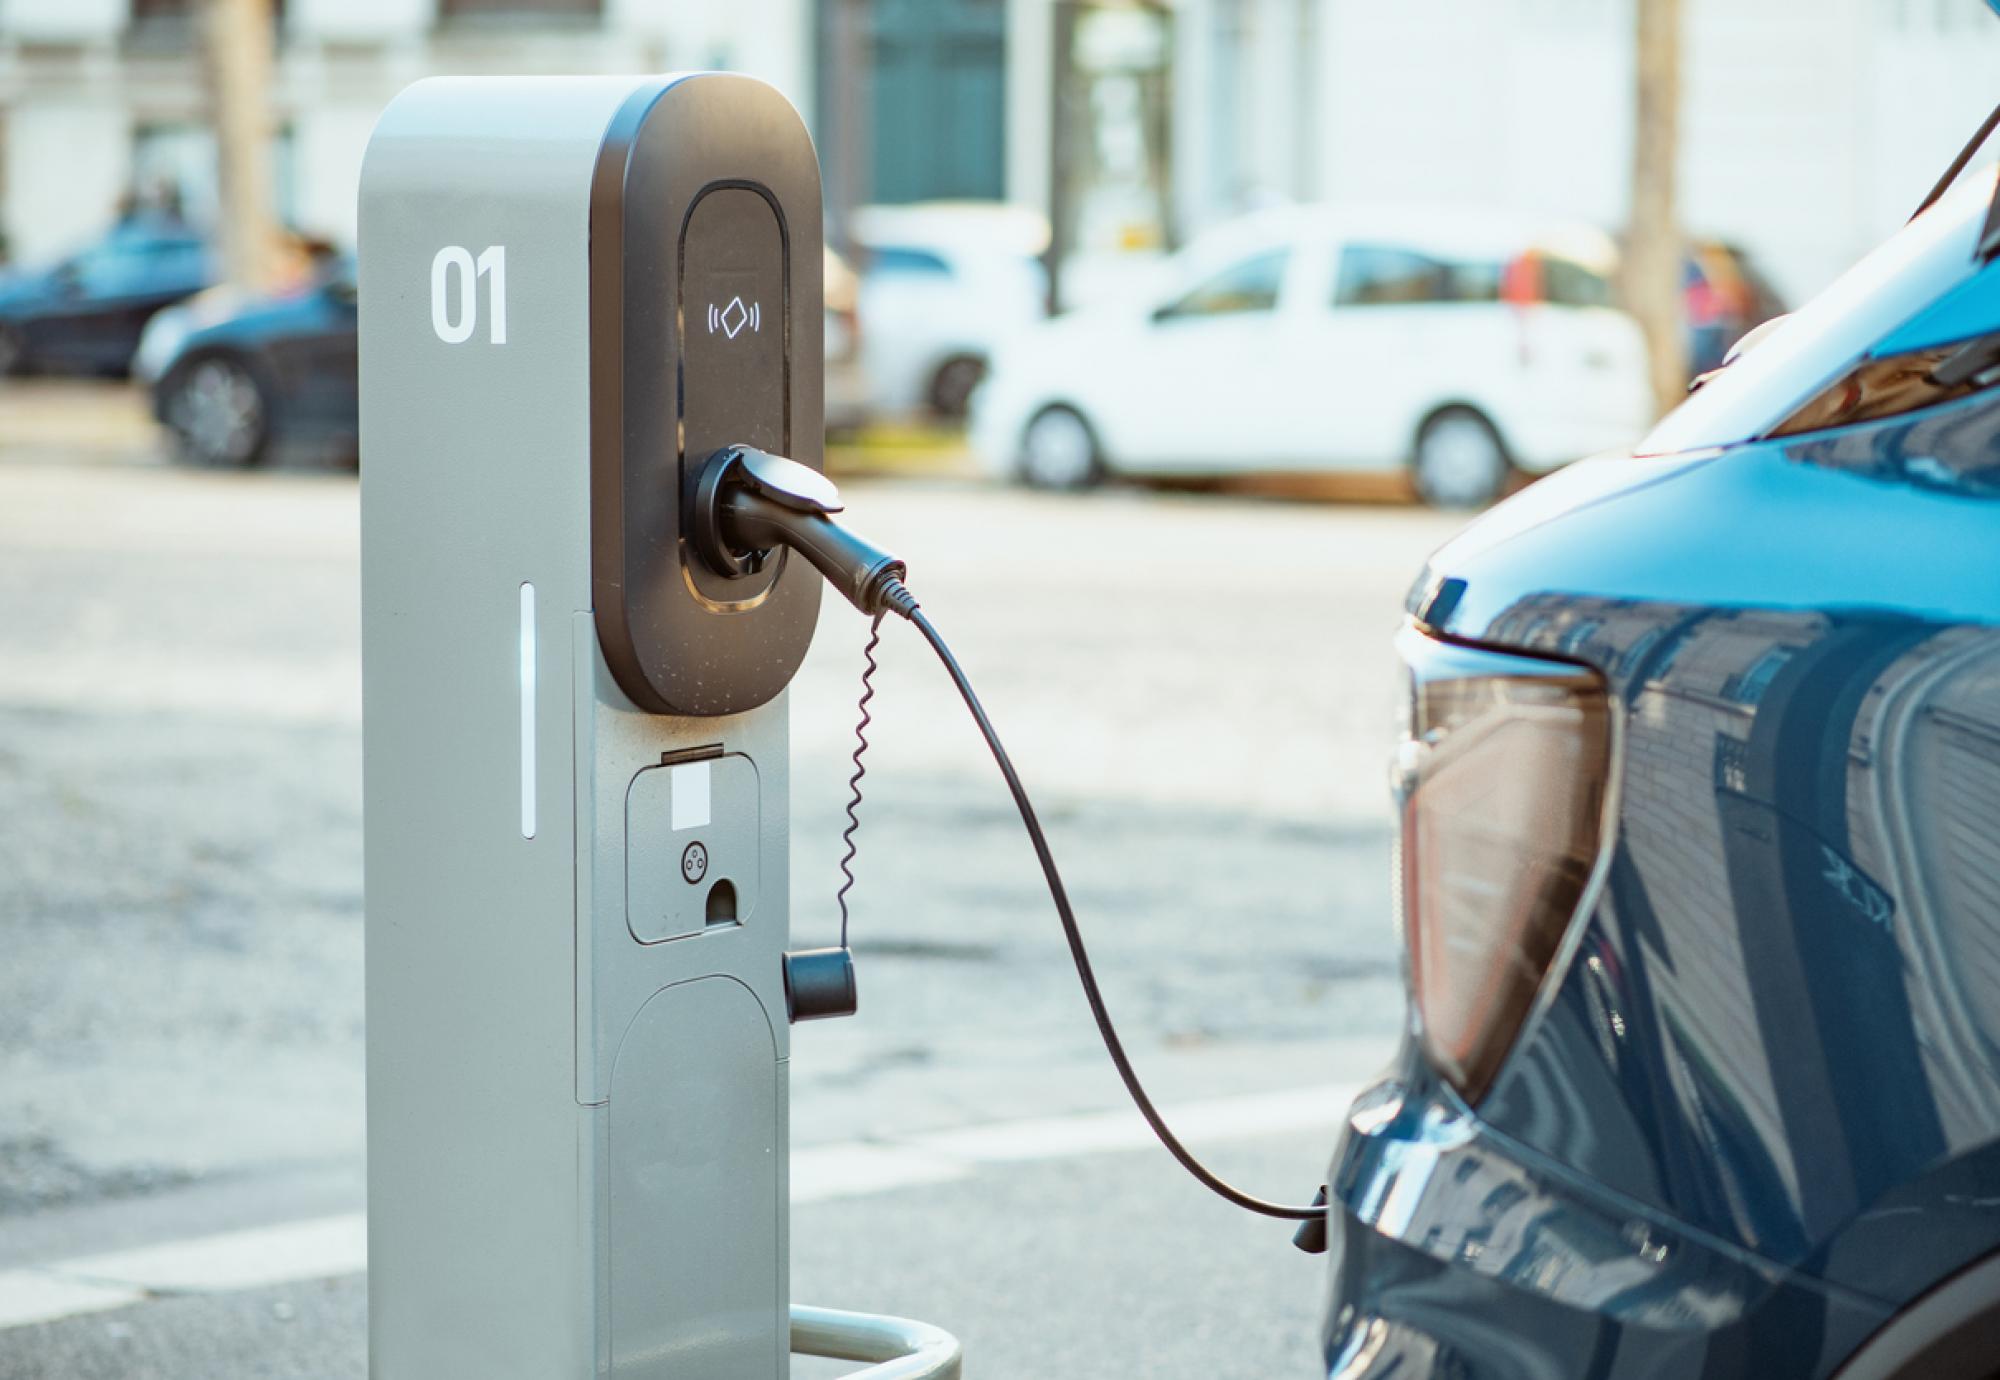 Electric Vehicle charging